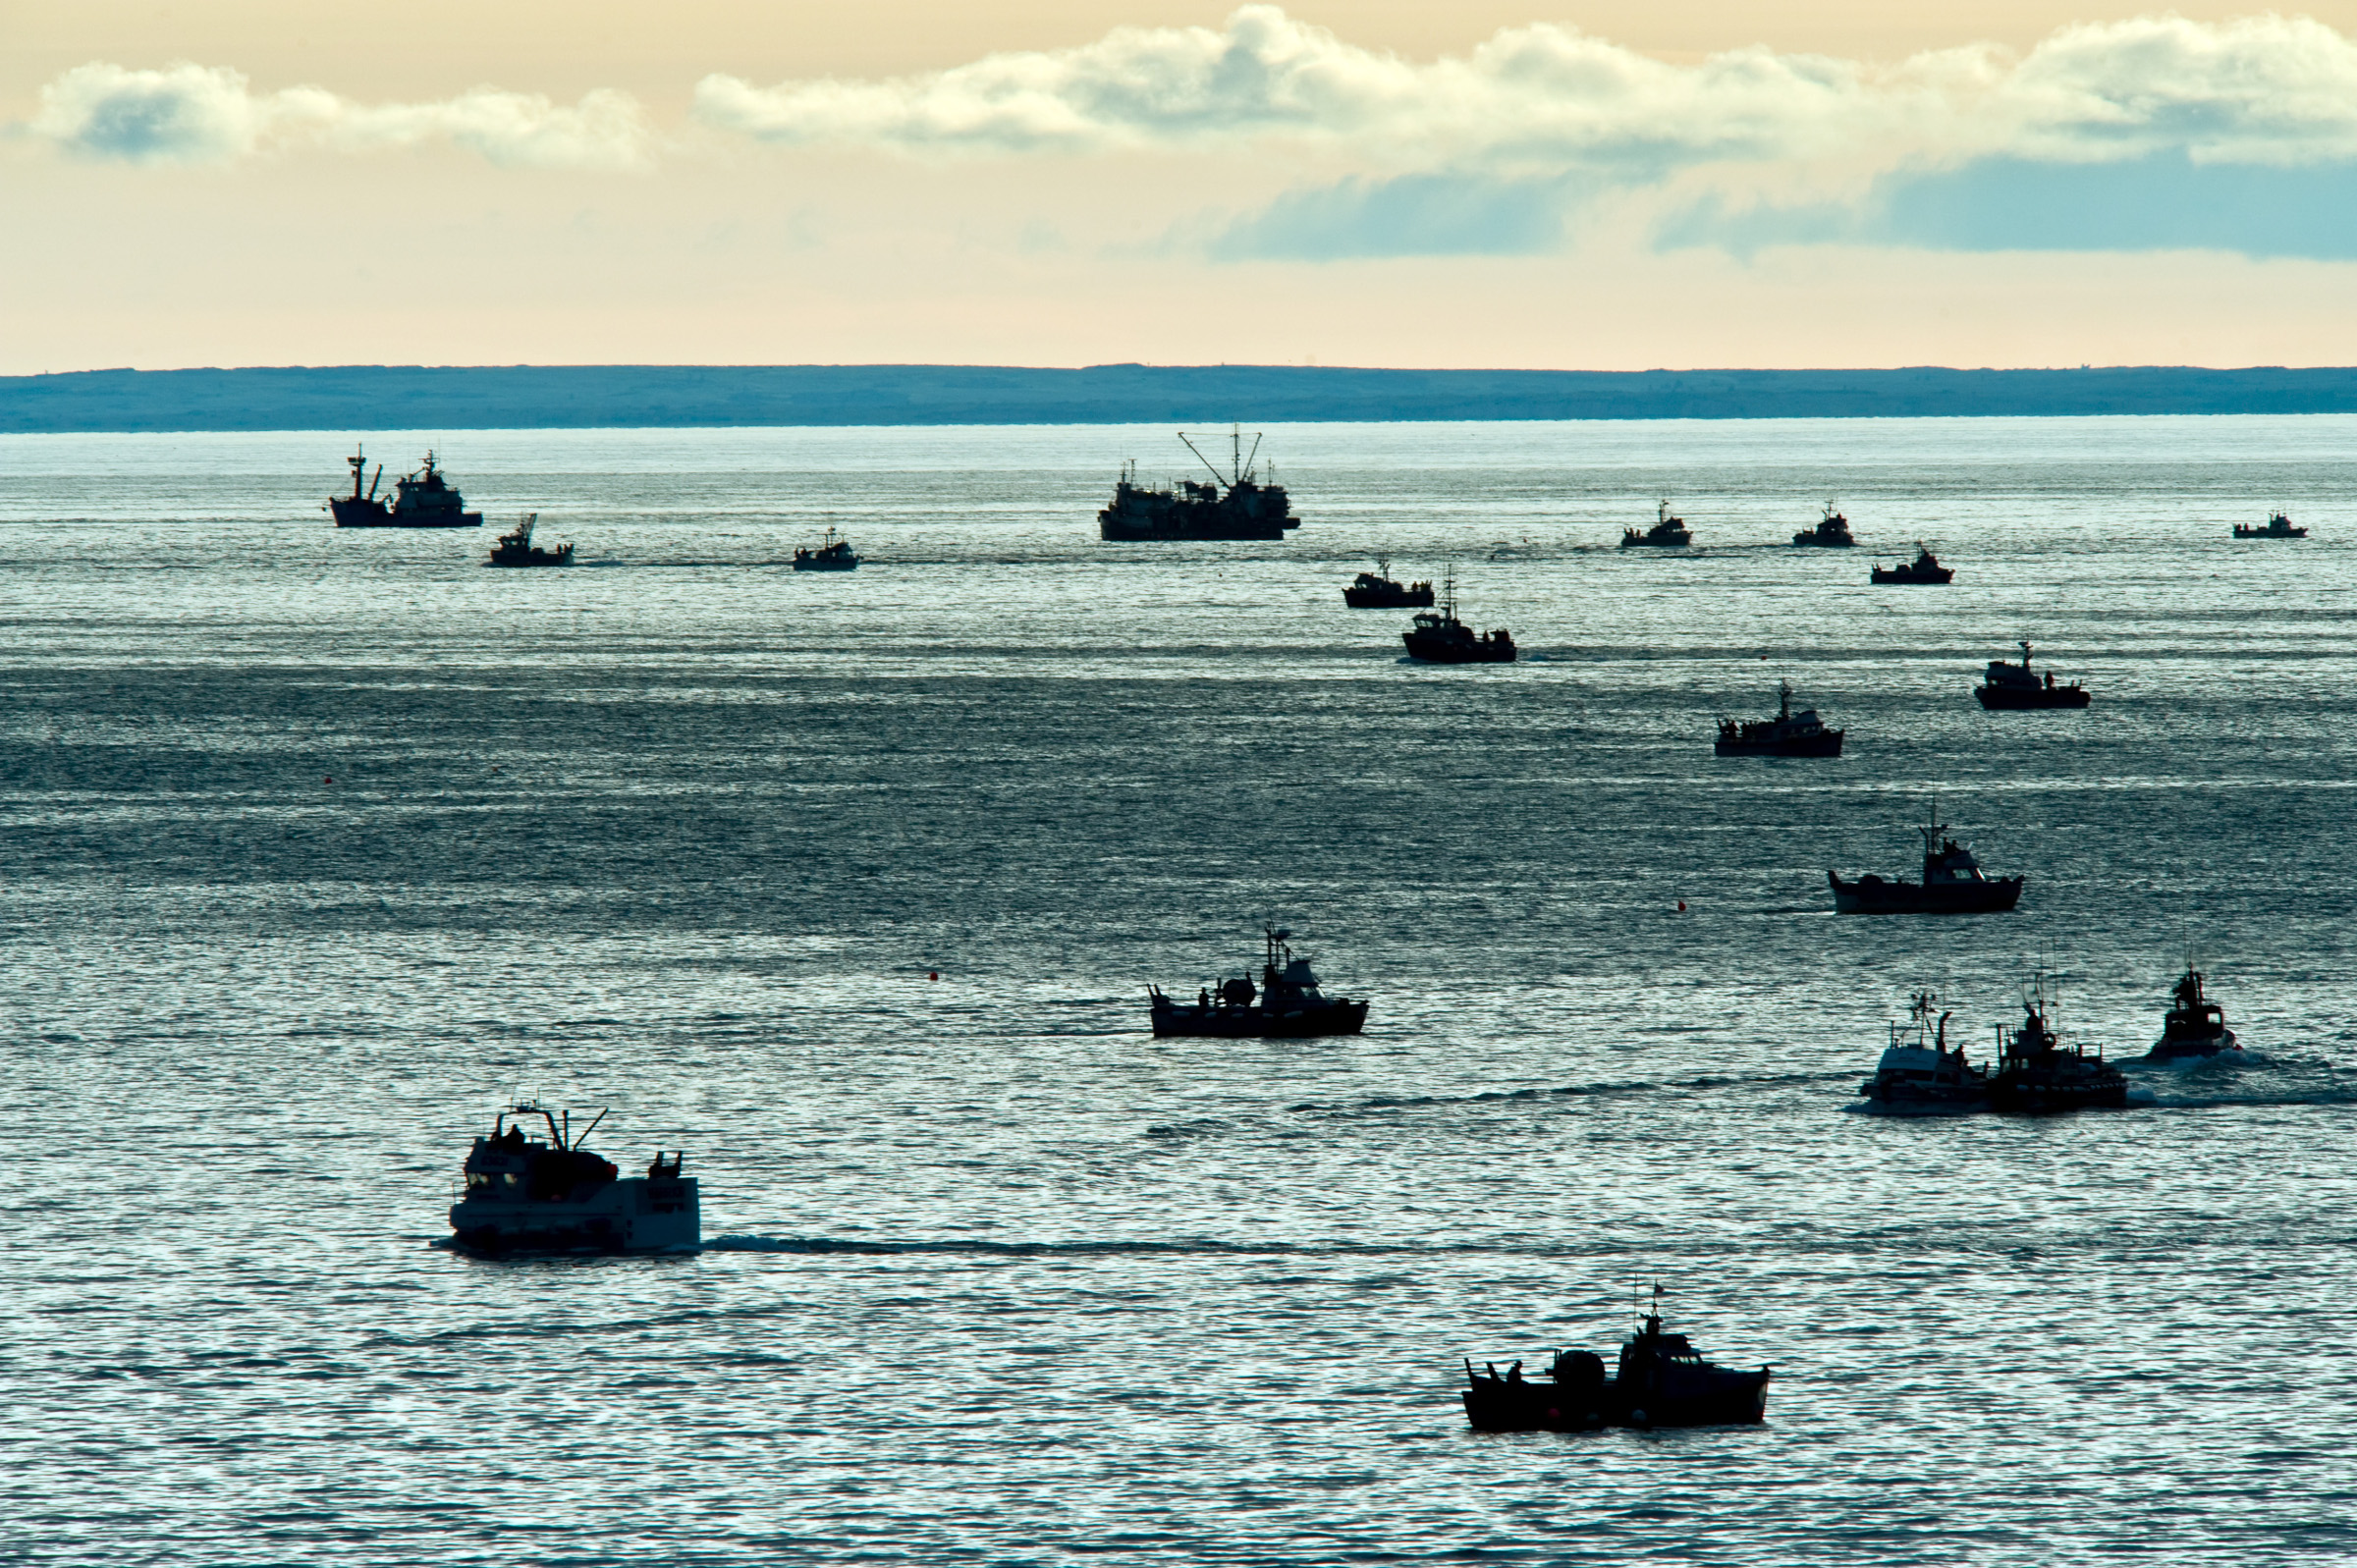 Several commercial fishing boats in Bristol Bay.